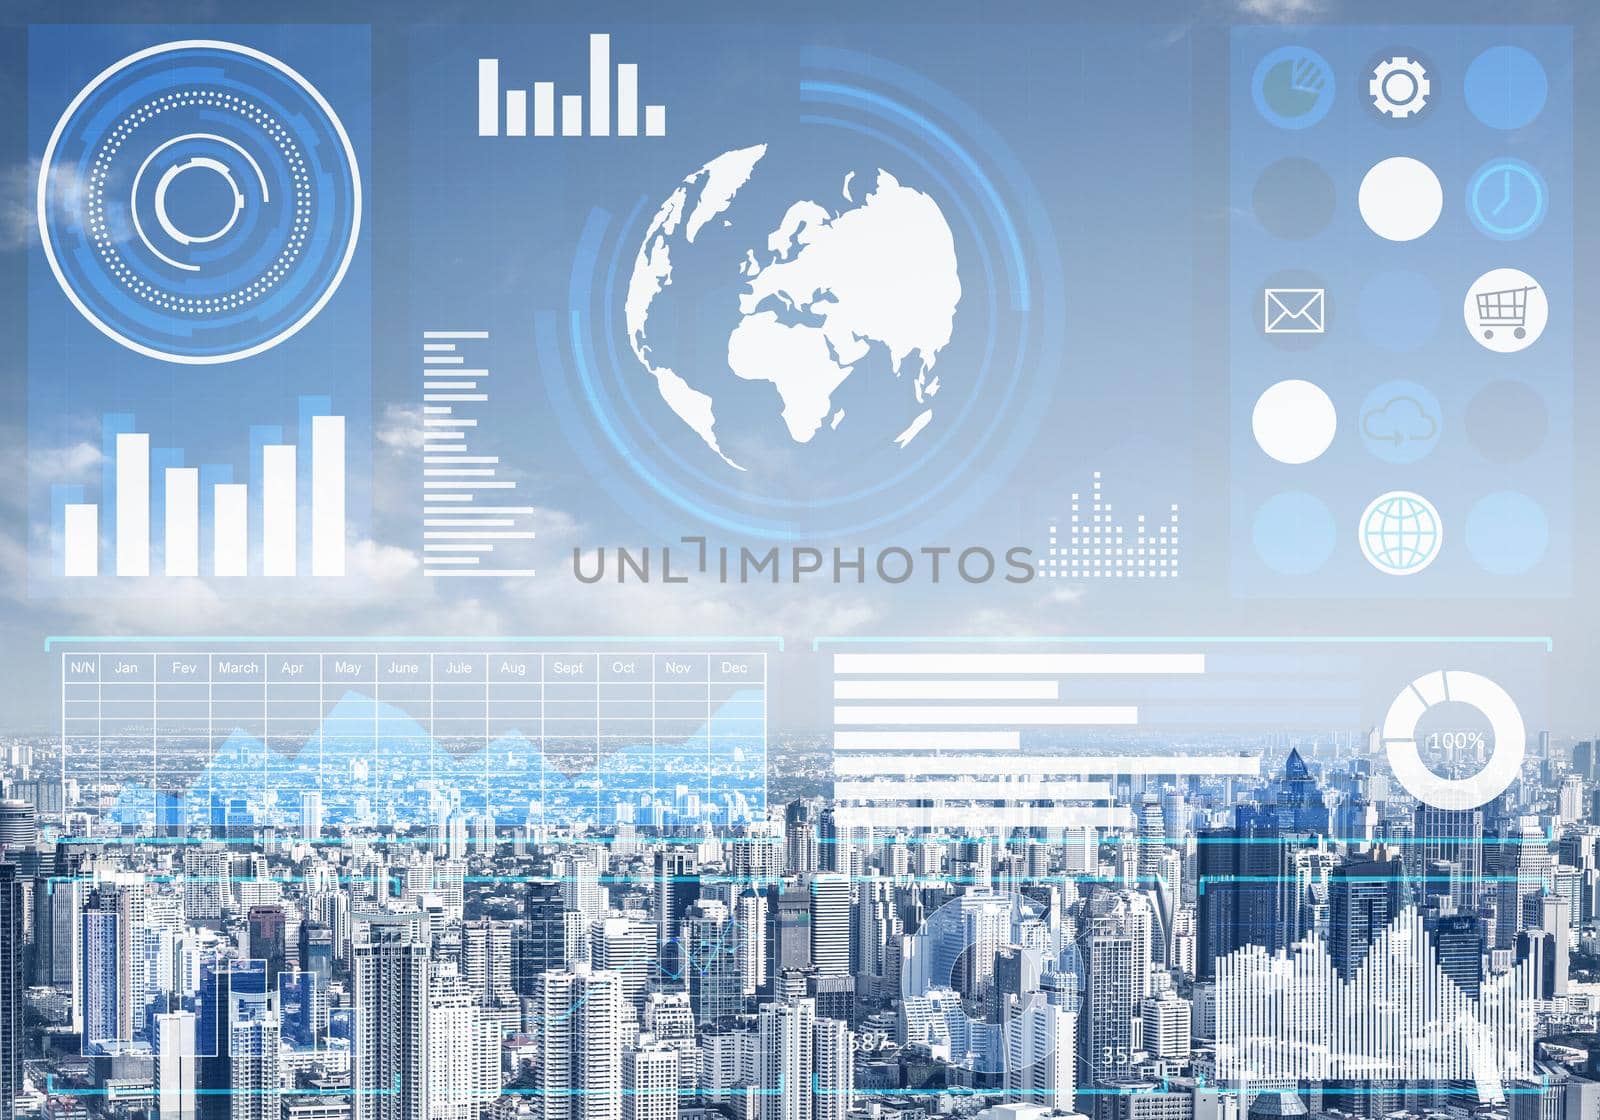 Double exposure business concept with abstract financial graphics on background of modern cityscape. Concept of trading and global financial markets. Digital economy, analytics and statistics.